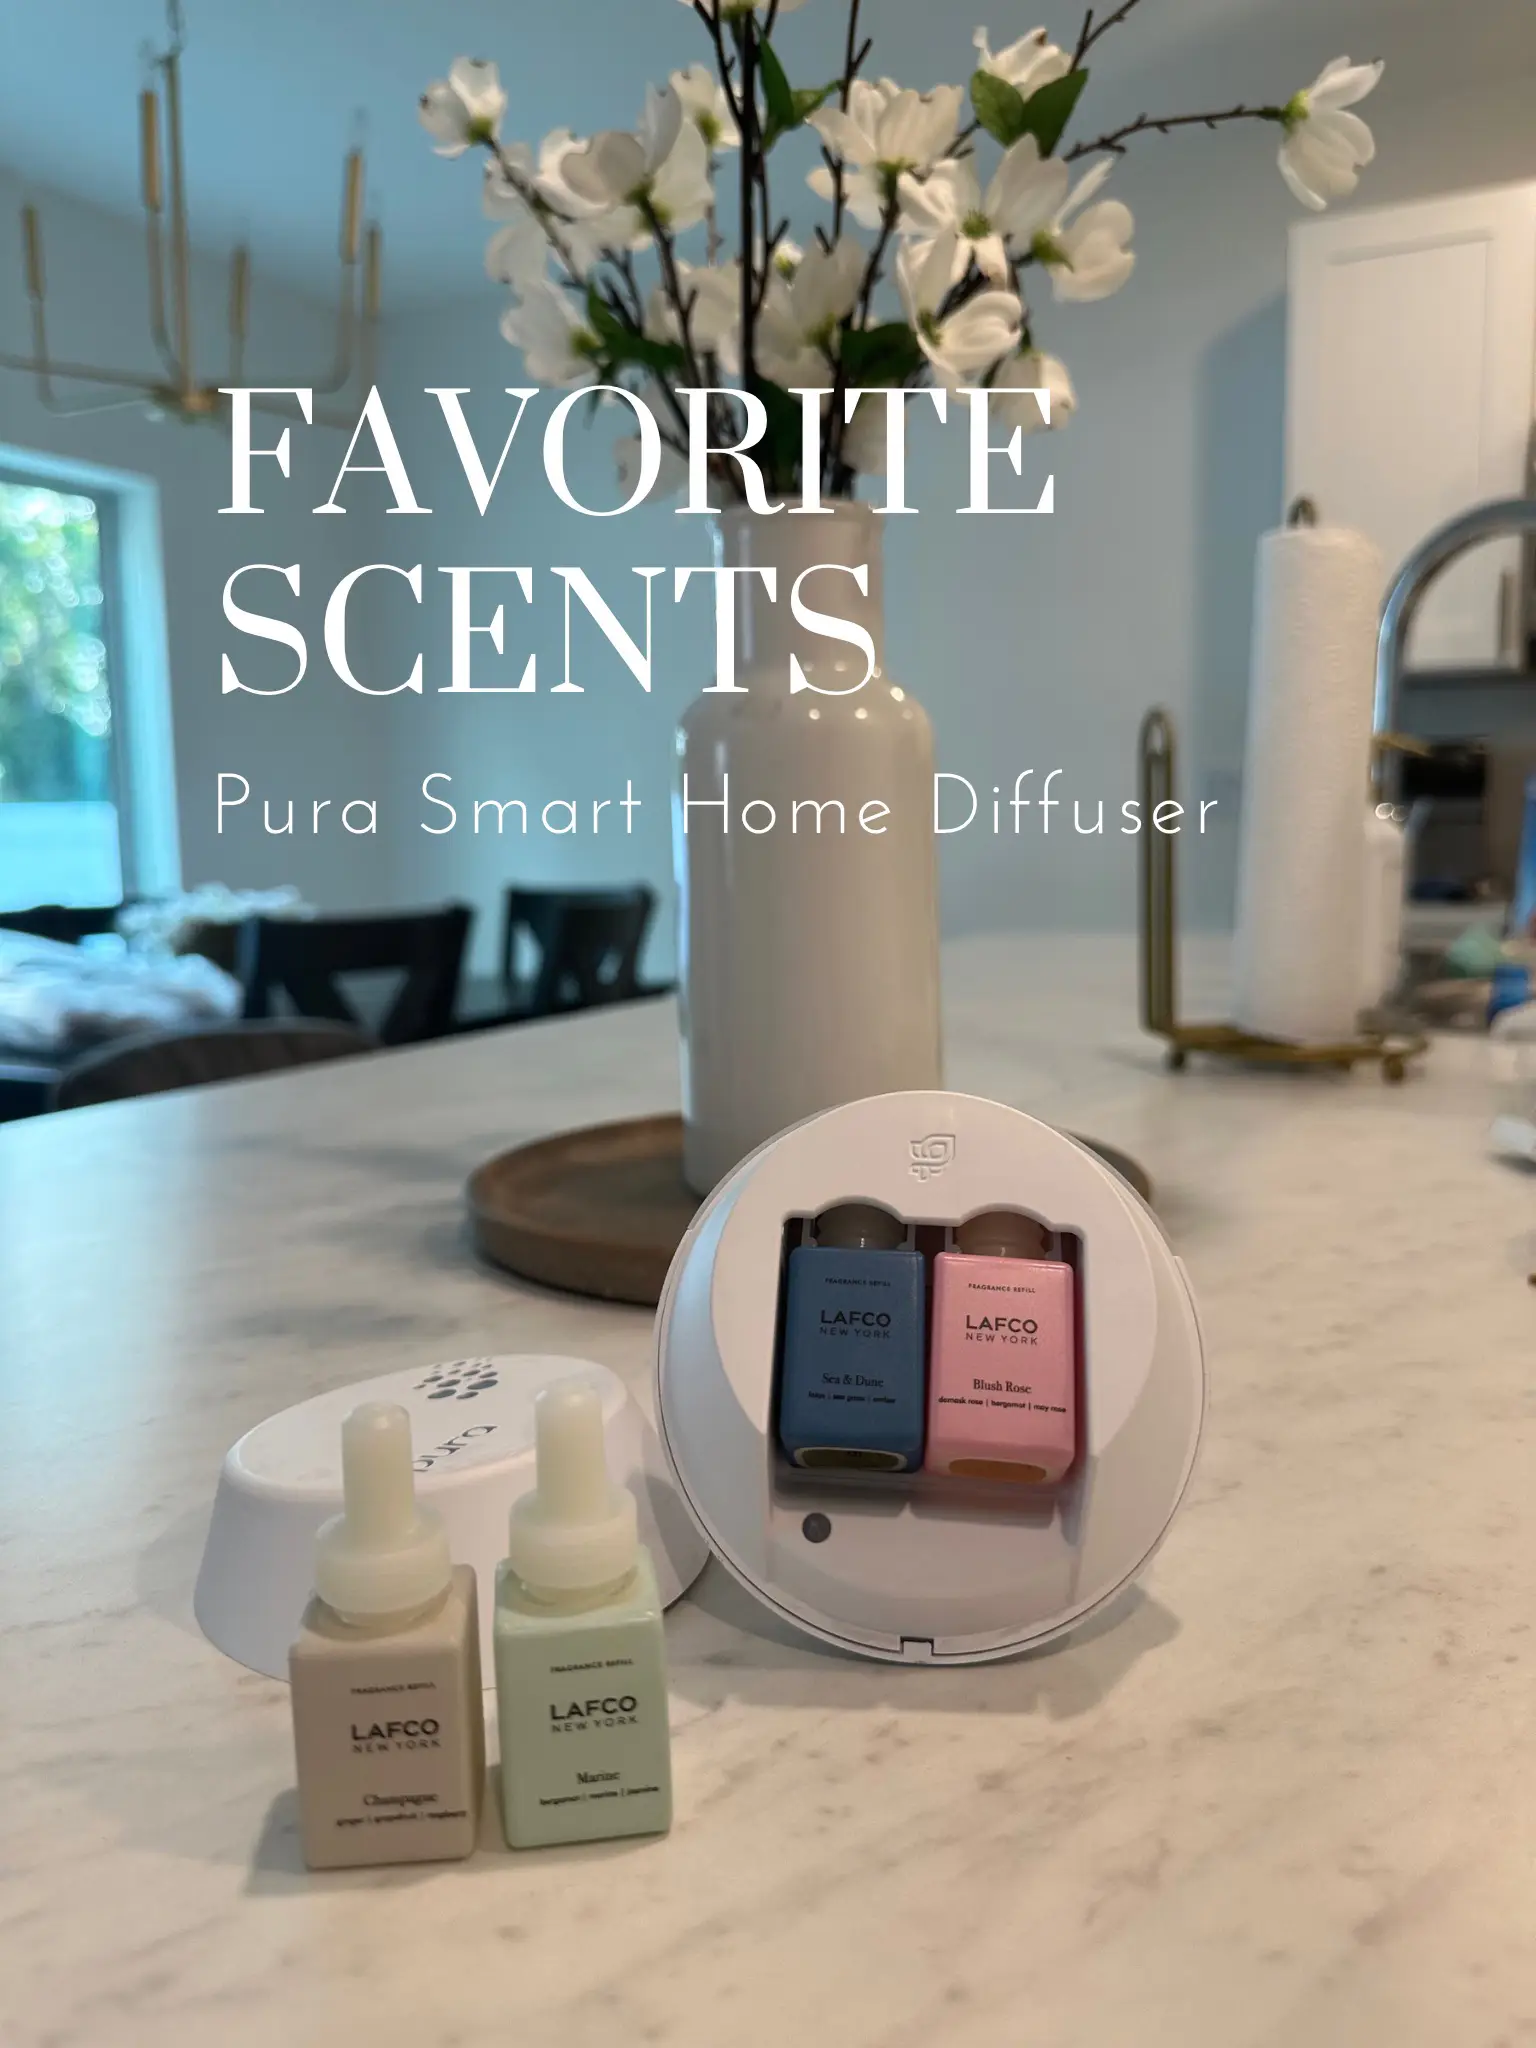 My favorite scents from Pura✨, Gallery posted by Gaby